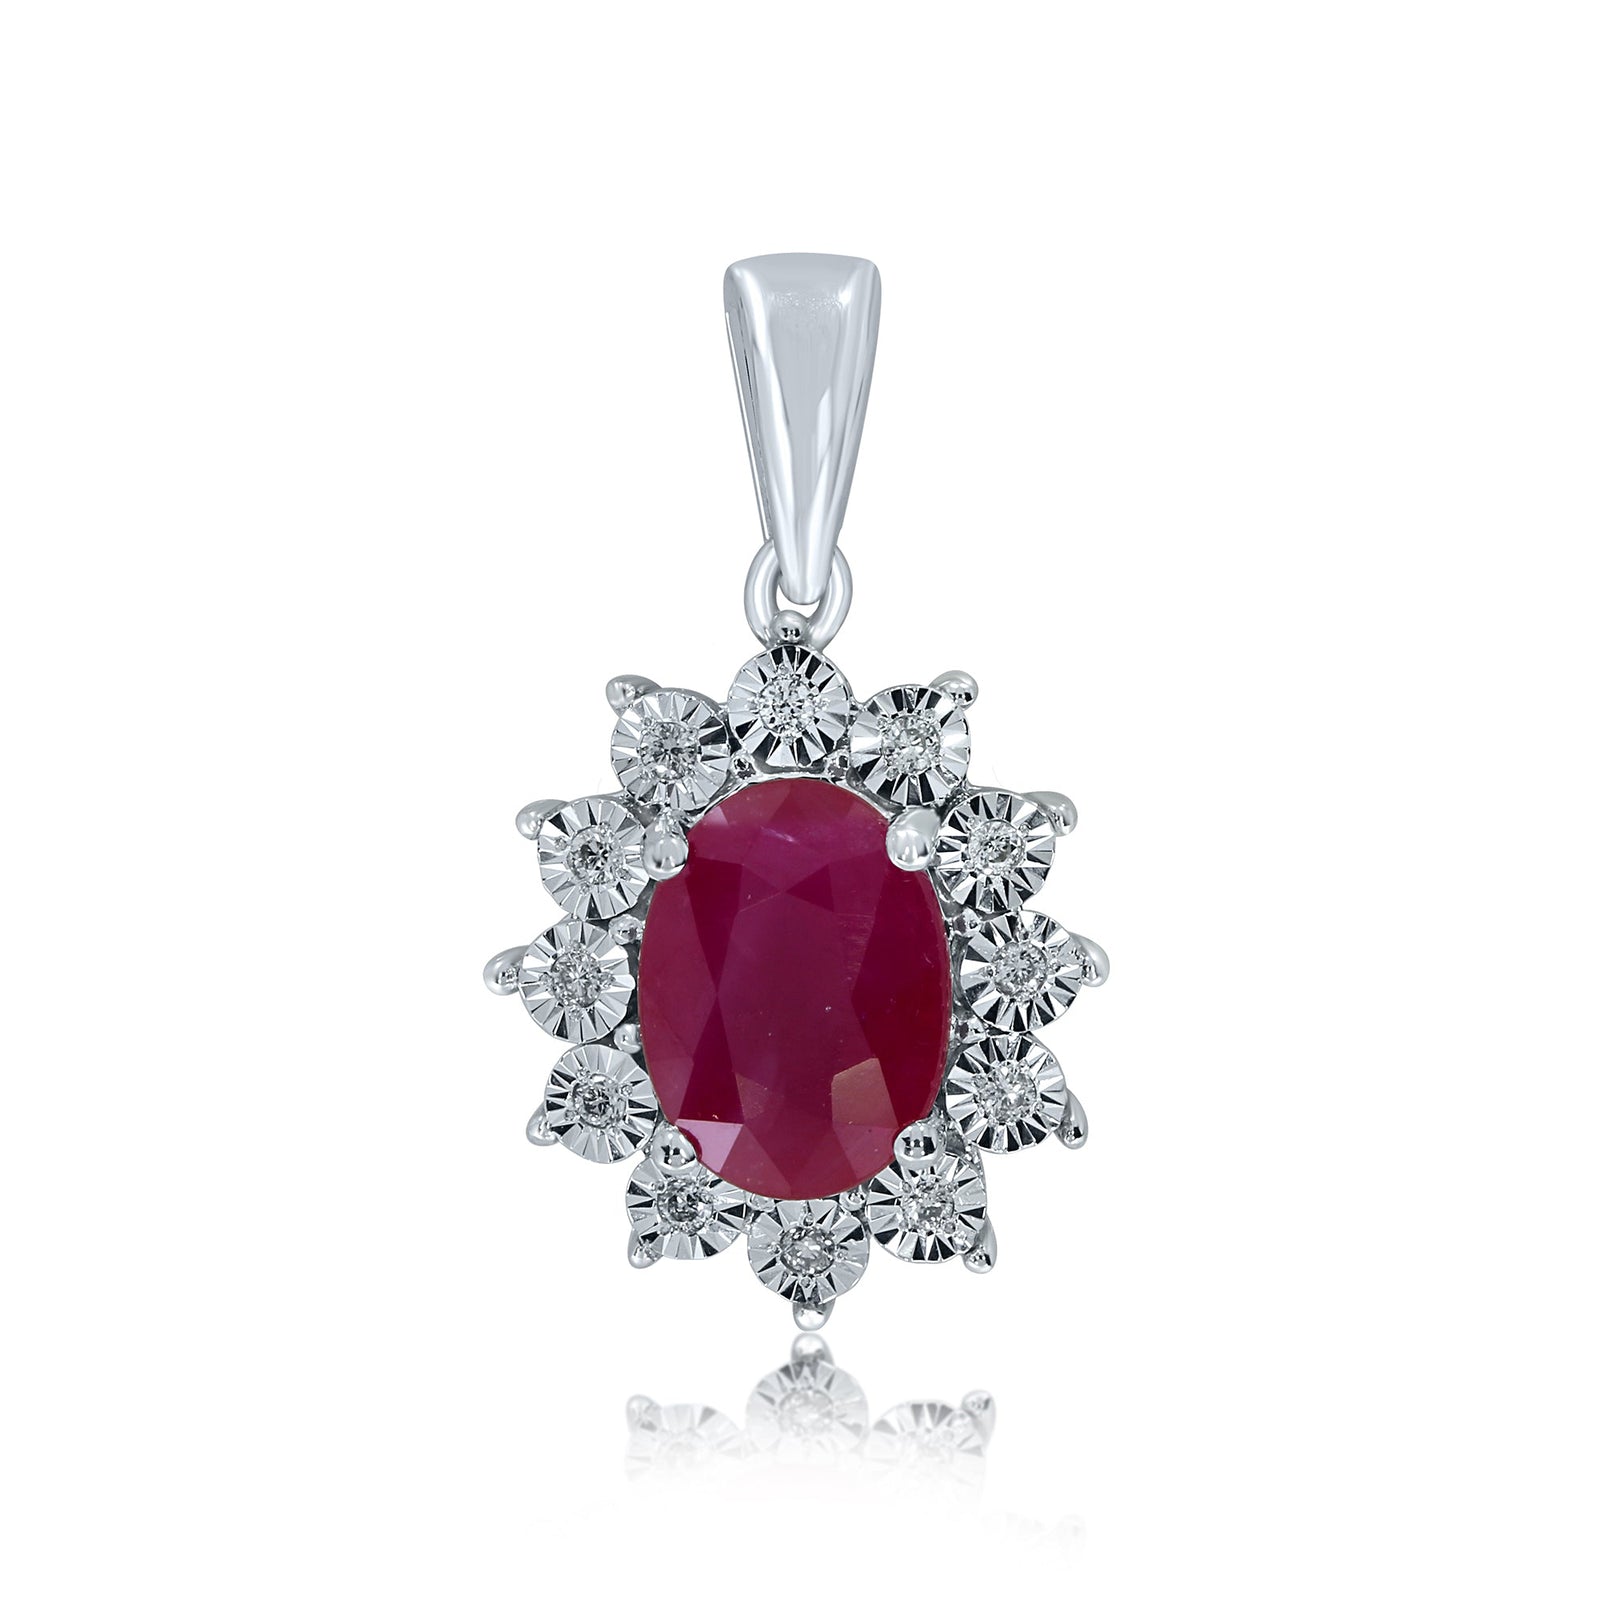 9ct white gold 7x5mm oval ruby & miracle plate diamond cluster pendant 0.04ct